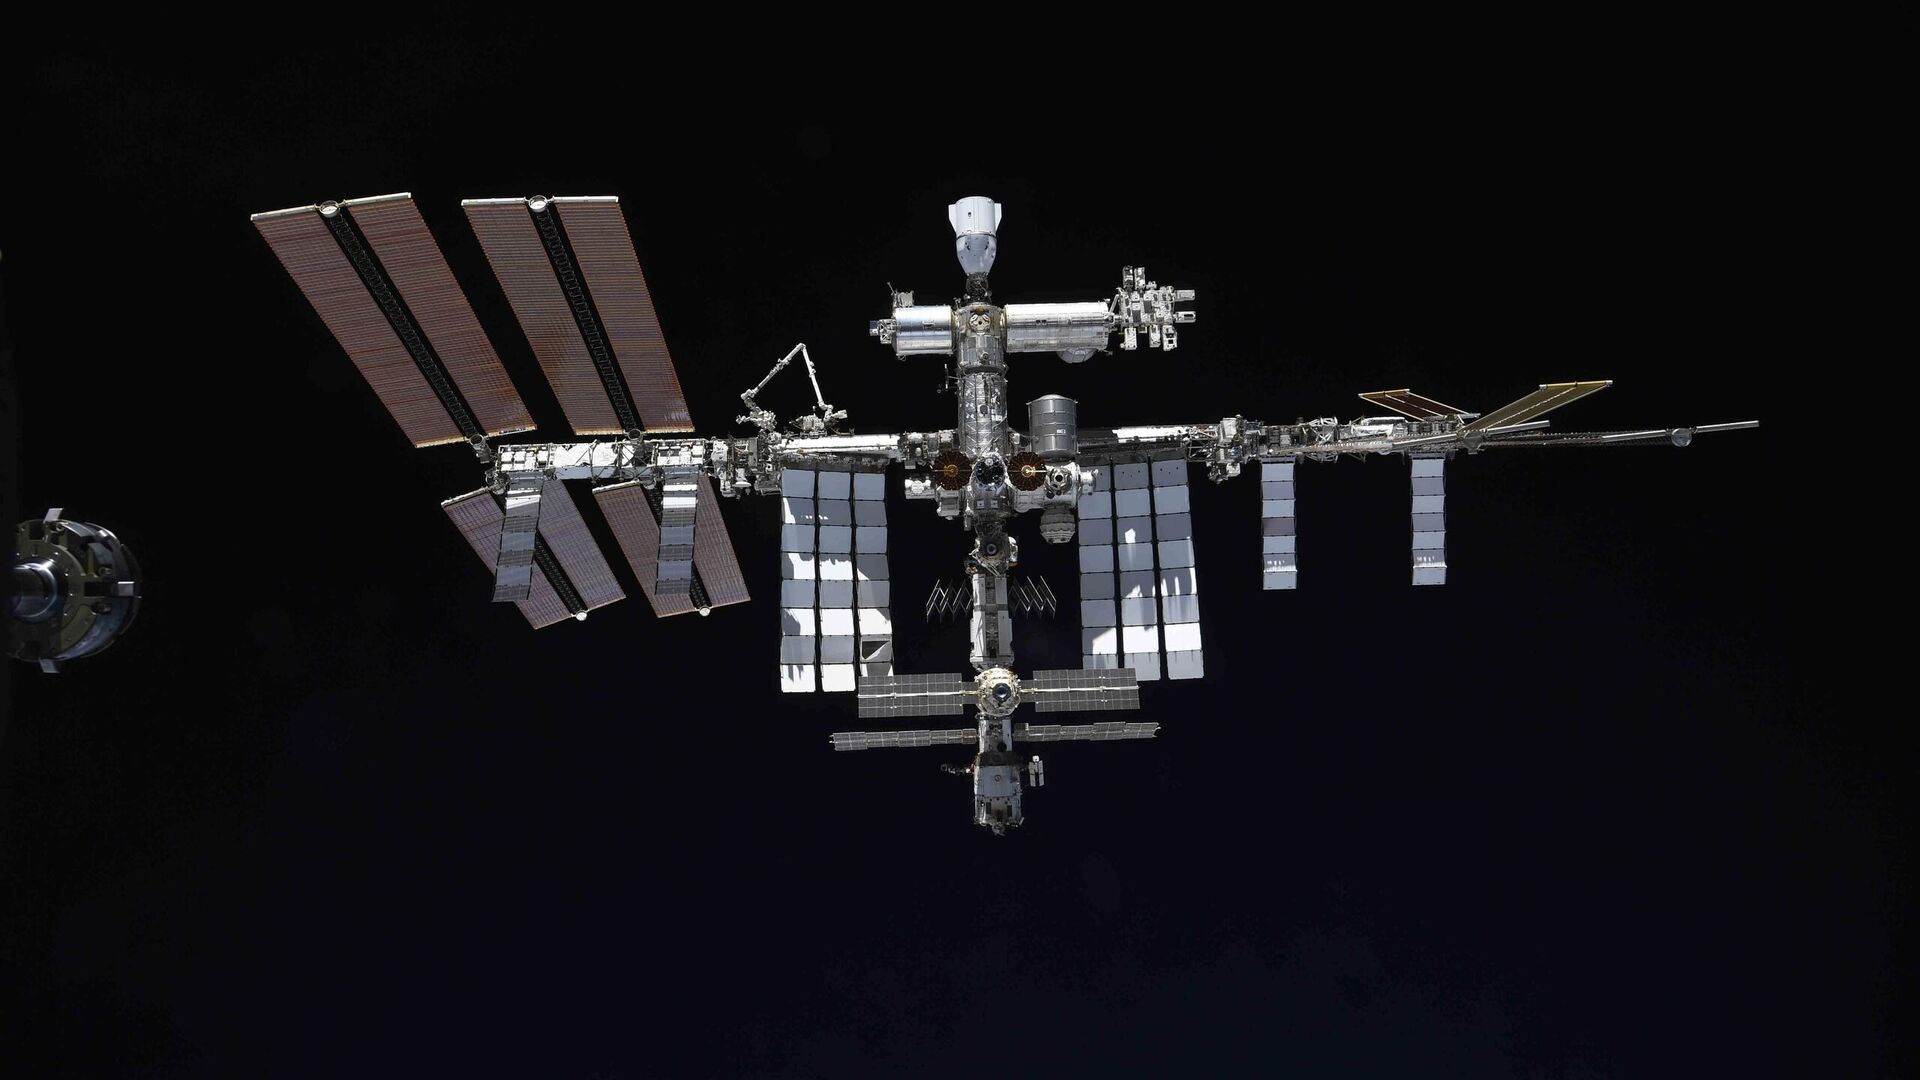 International space station with docked module Science -, 1920, 21.10.2021